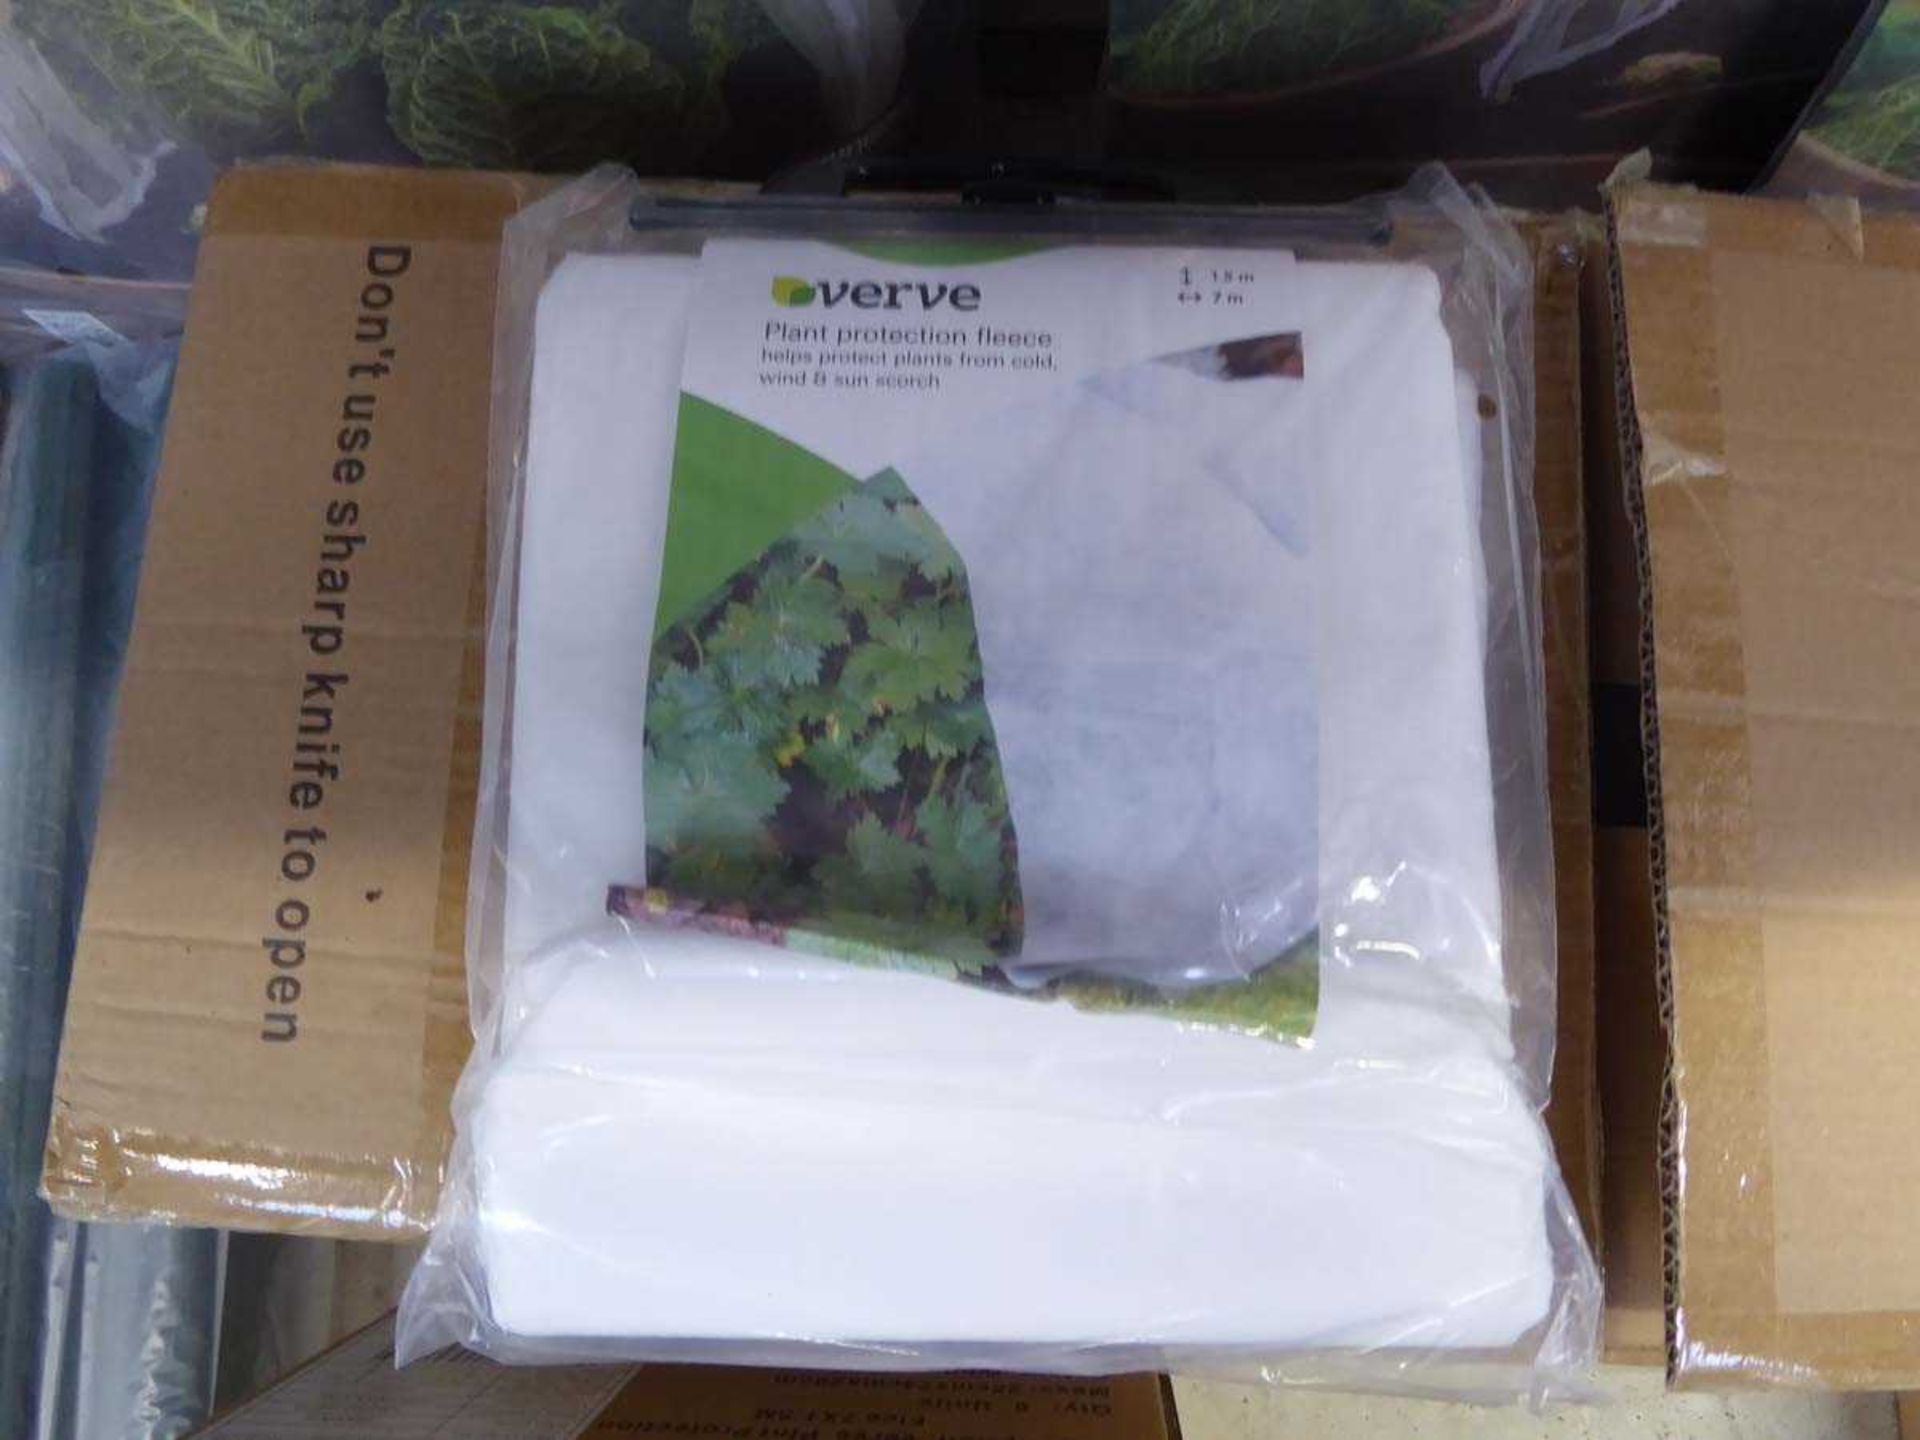 2 boxes containing 12 Verve plant protection fleeces - Image 2 of 2